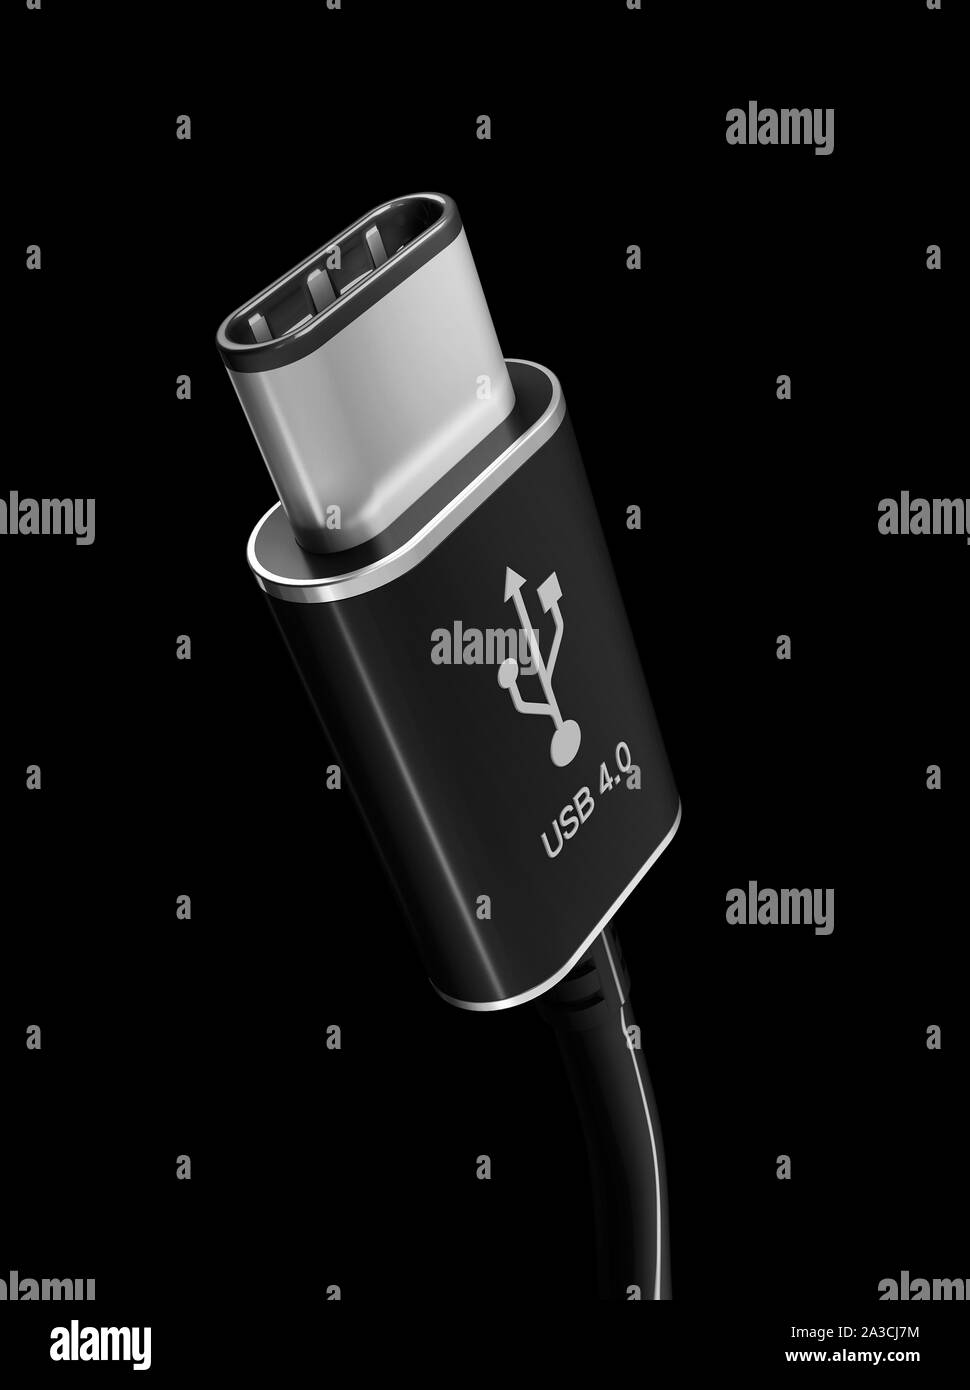 USB Type C or USB 4 connector cable line art 3d Illustration. Stock Photo